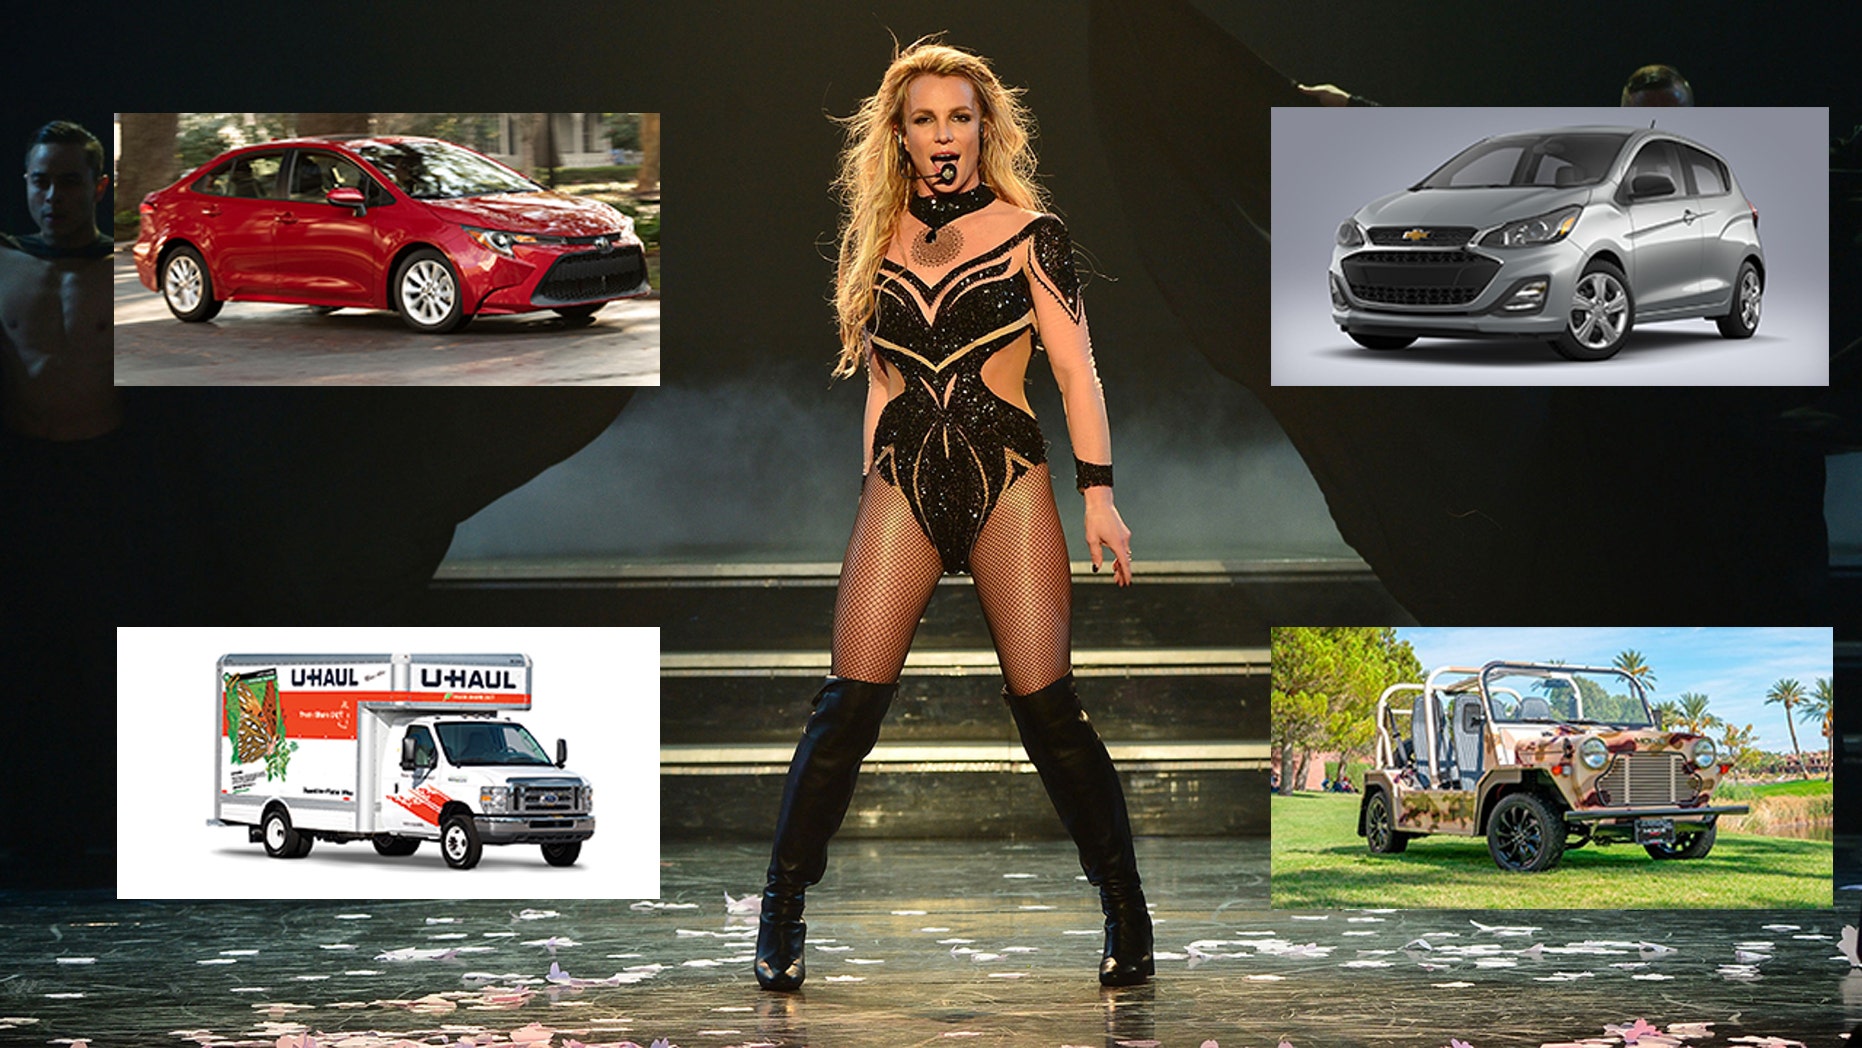 Britney Spears is 'driving the cheapest car known to mankind,' but what is it?